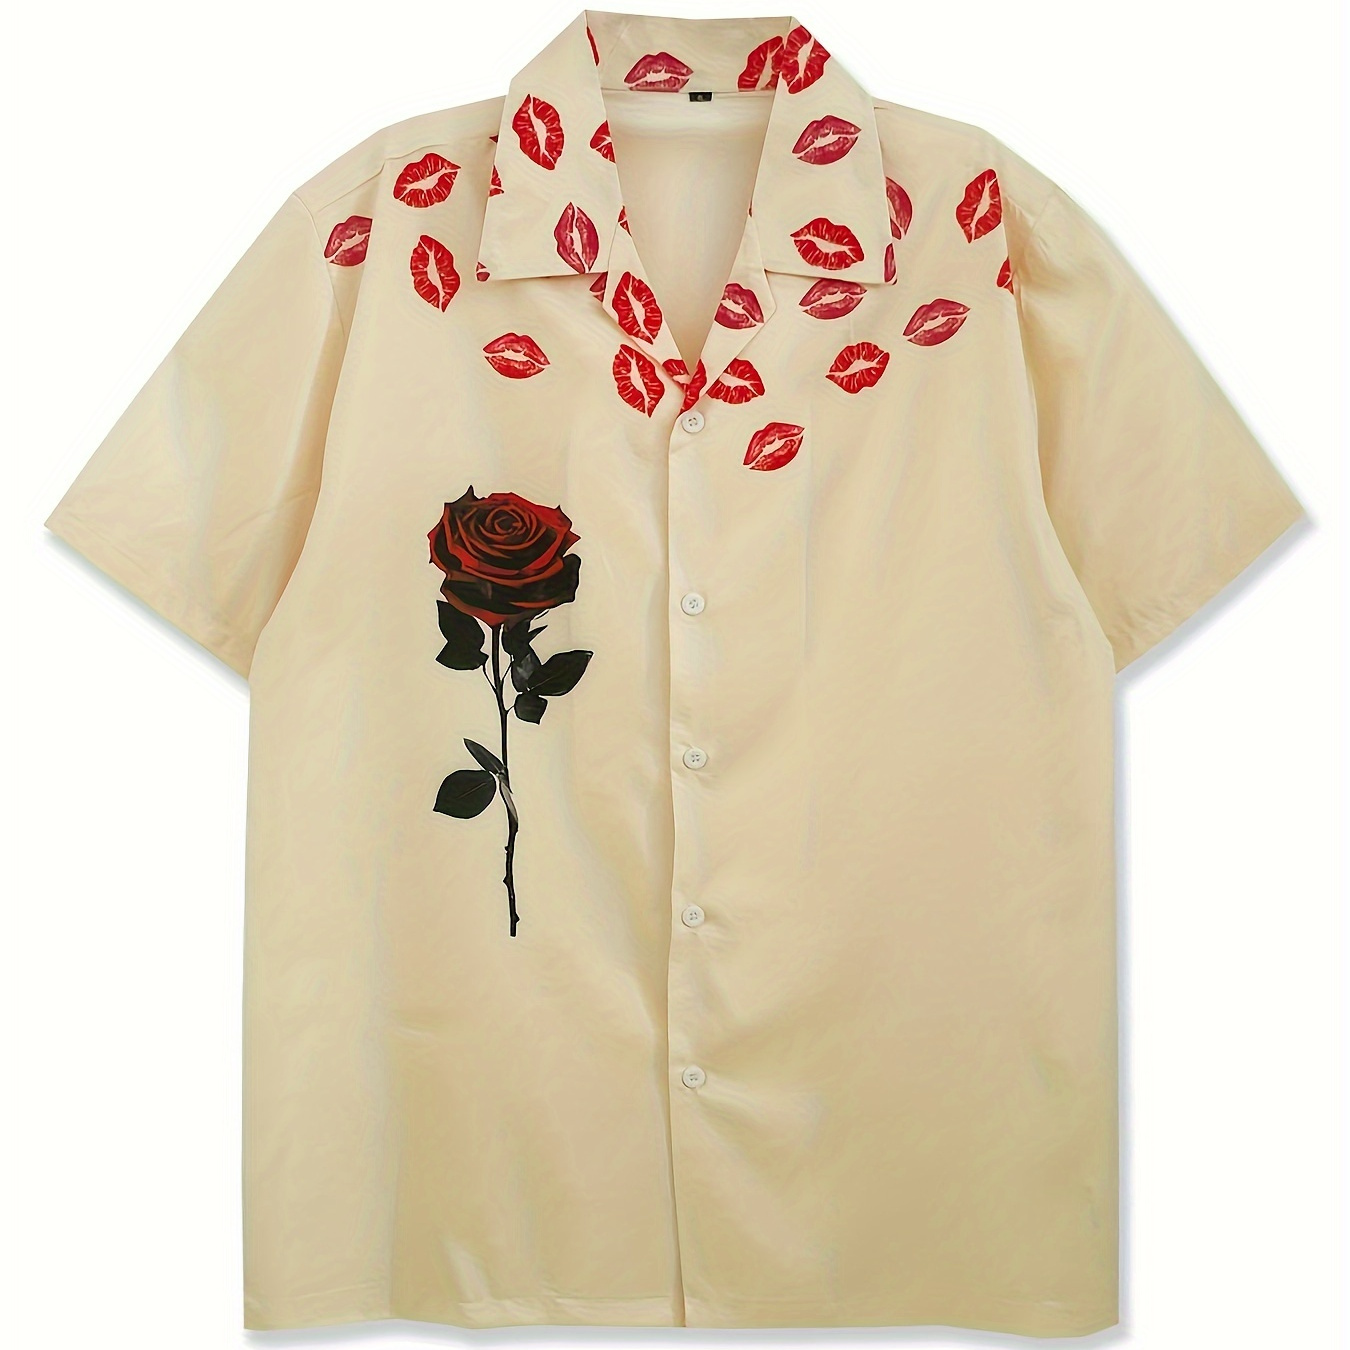 

Red Lips & Rose Graphic Print Men's Short Sleeve Lapel Shirt Top, Male Casual Button Up Shirt For Daily And Vacation Resorts